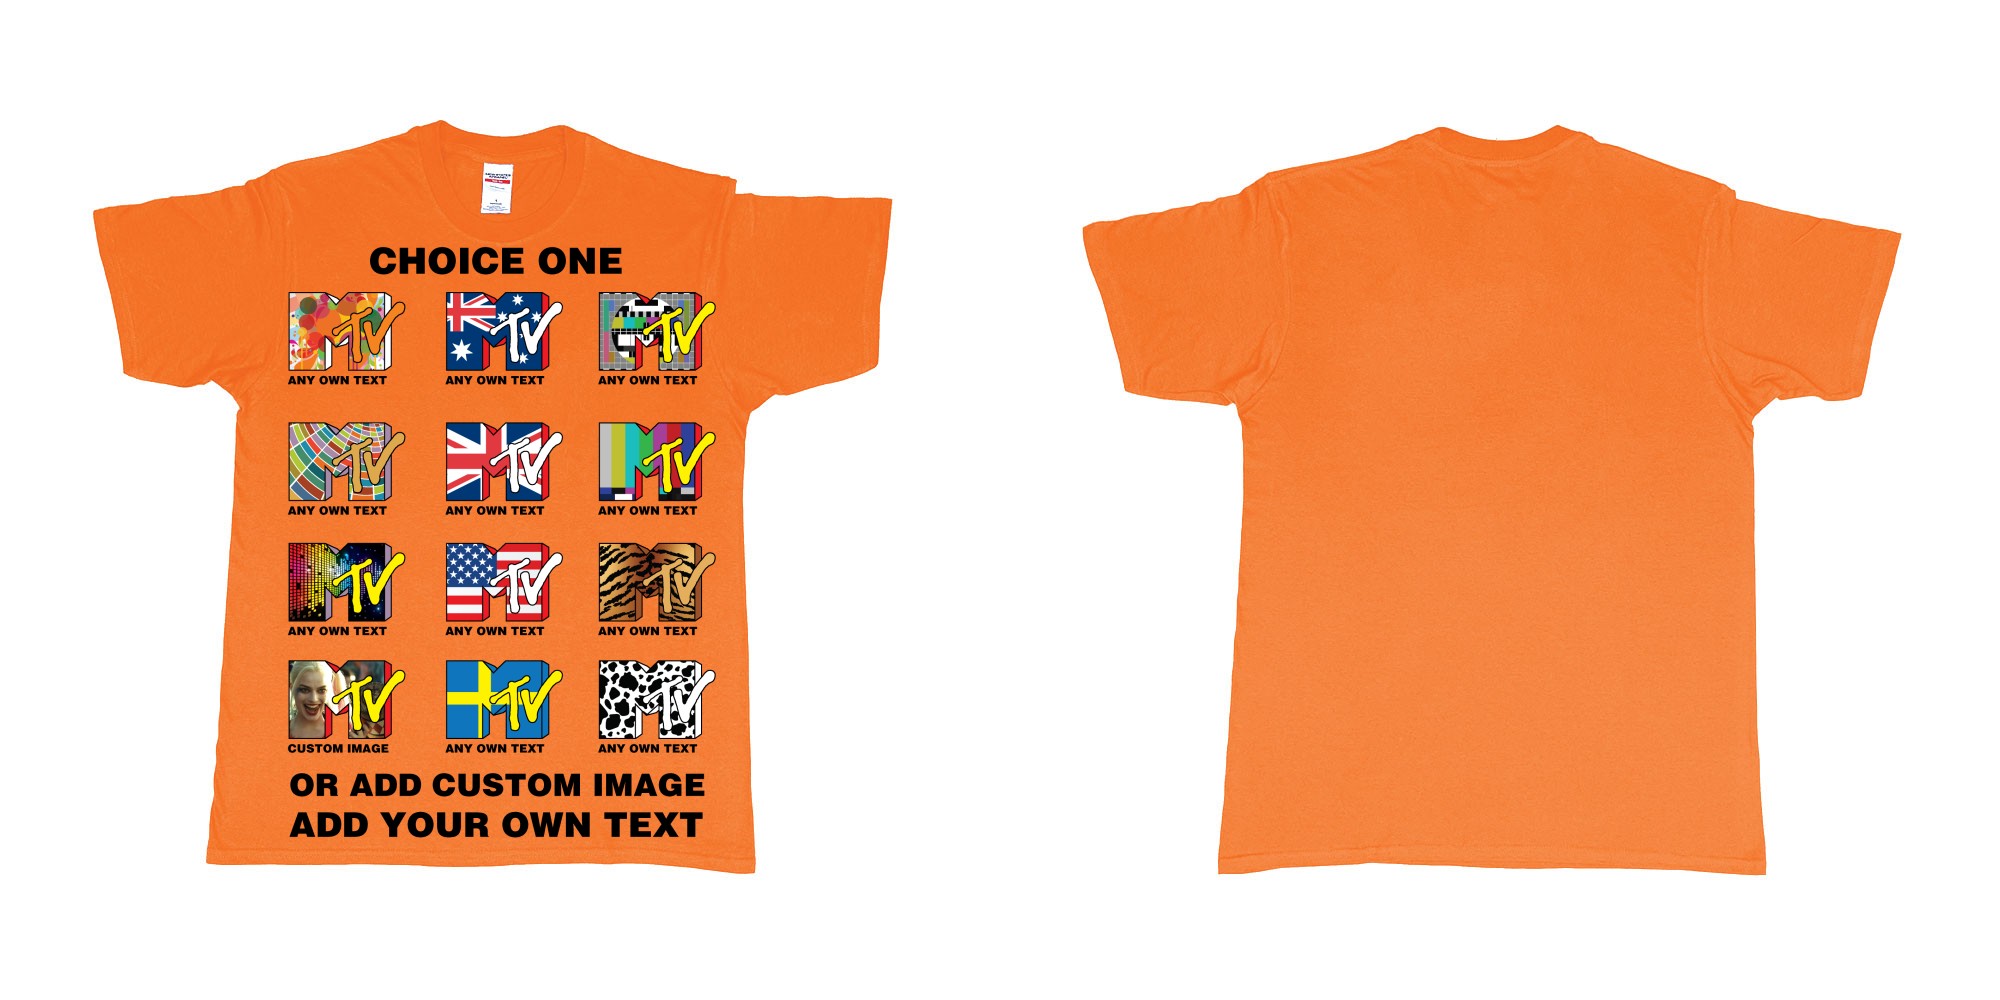 Custom tshirt design mtv logo choice any background text print in fabric color orange choice your own text made in Bali by The Pirate Way